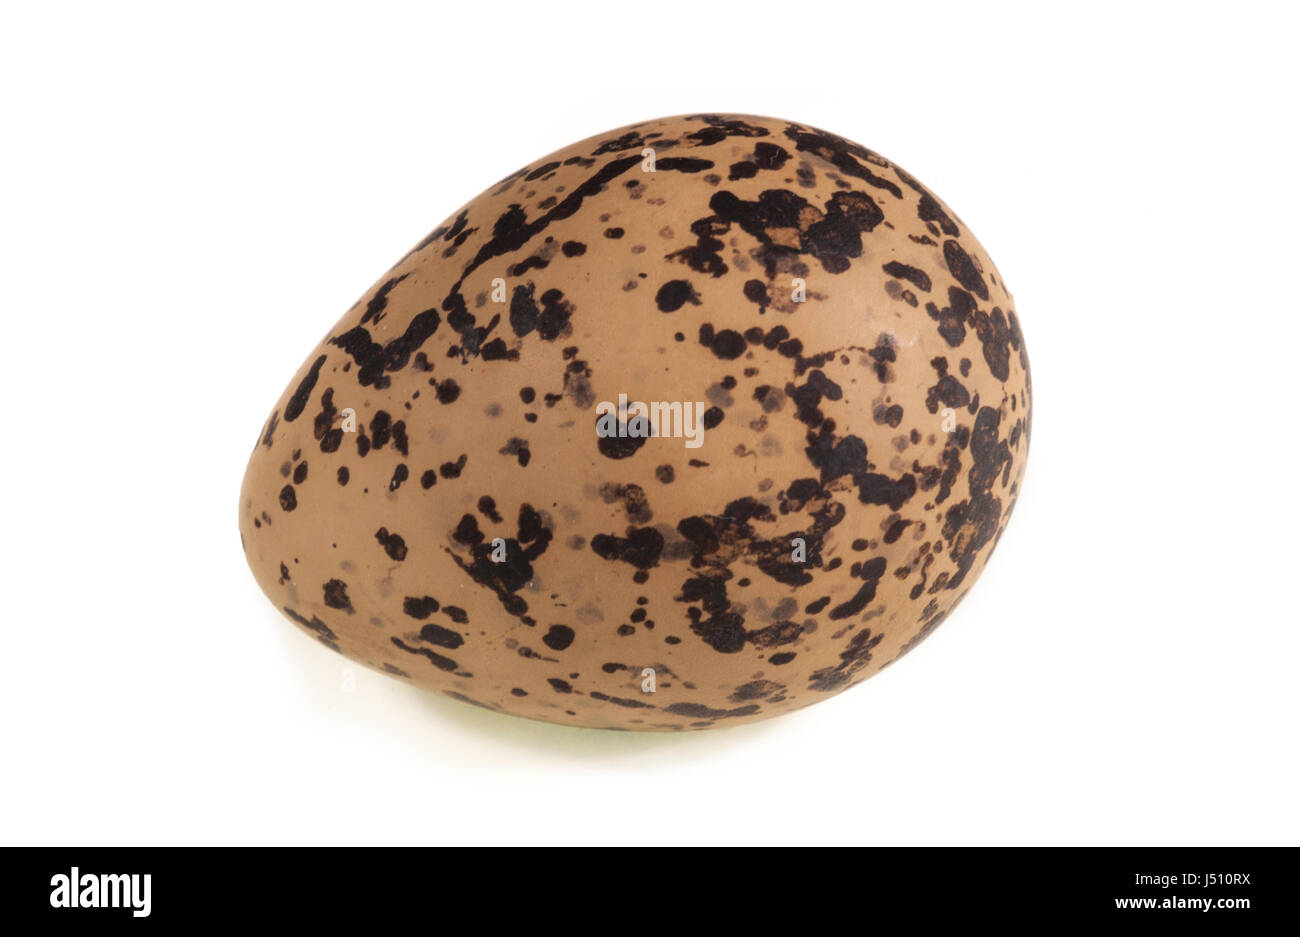 A Southern Lapwing (Vanellus chilensis) egg on a white background Stock Photo